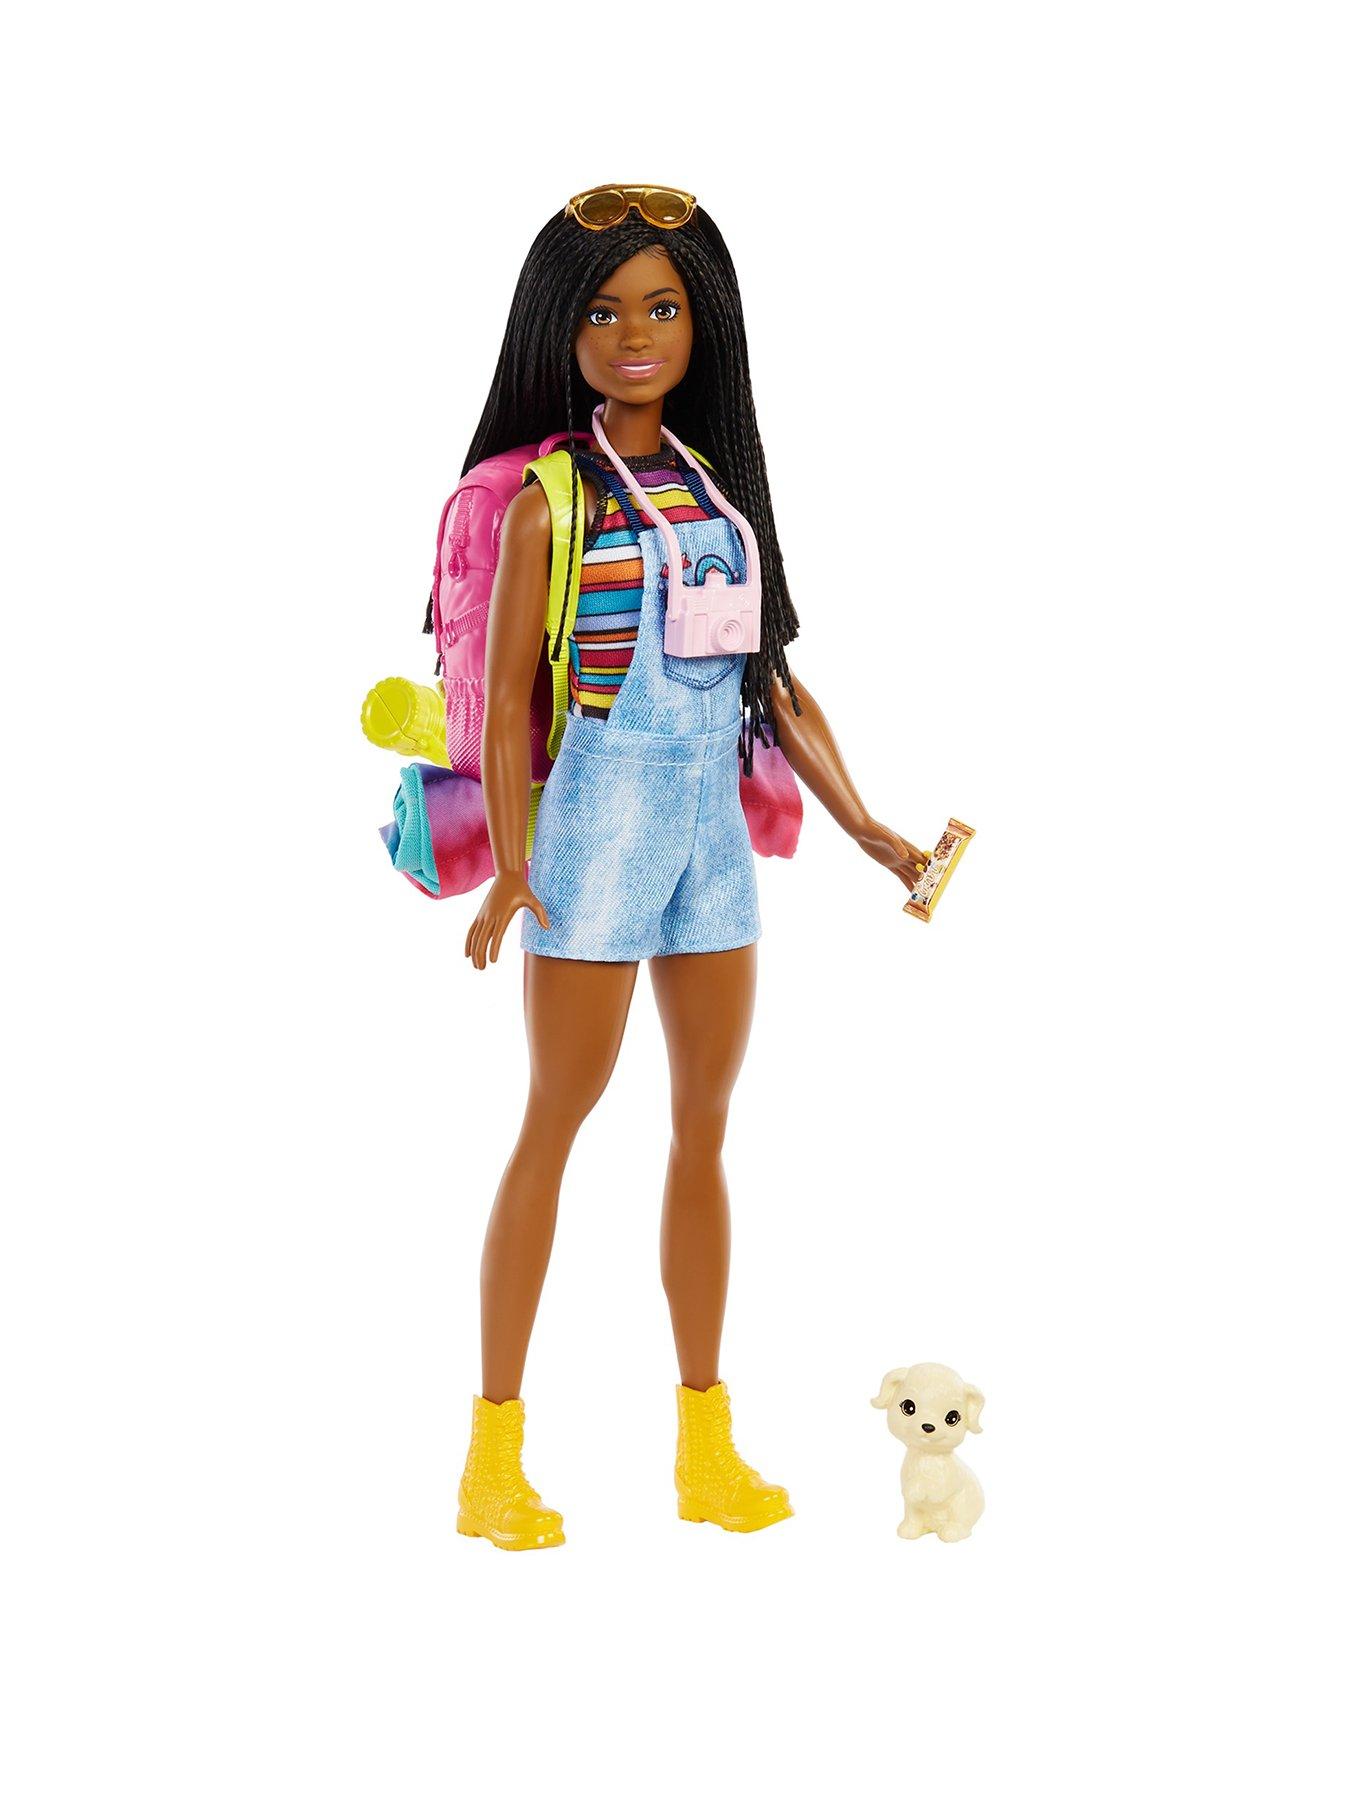 Details about   Multicolor Barbie Fashionistas Doll For Kids Age Pack of 1 3-5 Yrs Old 